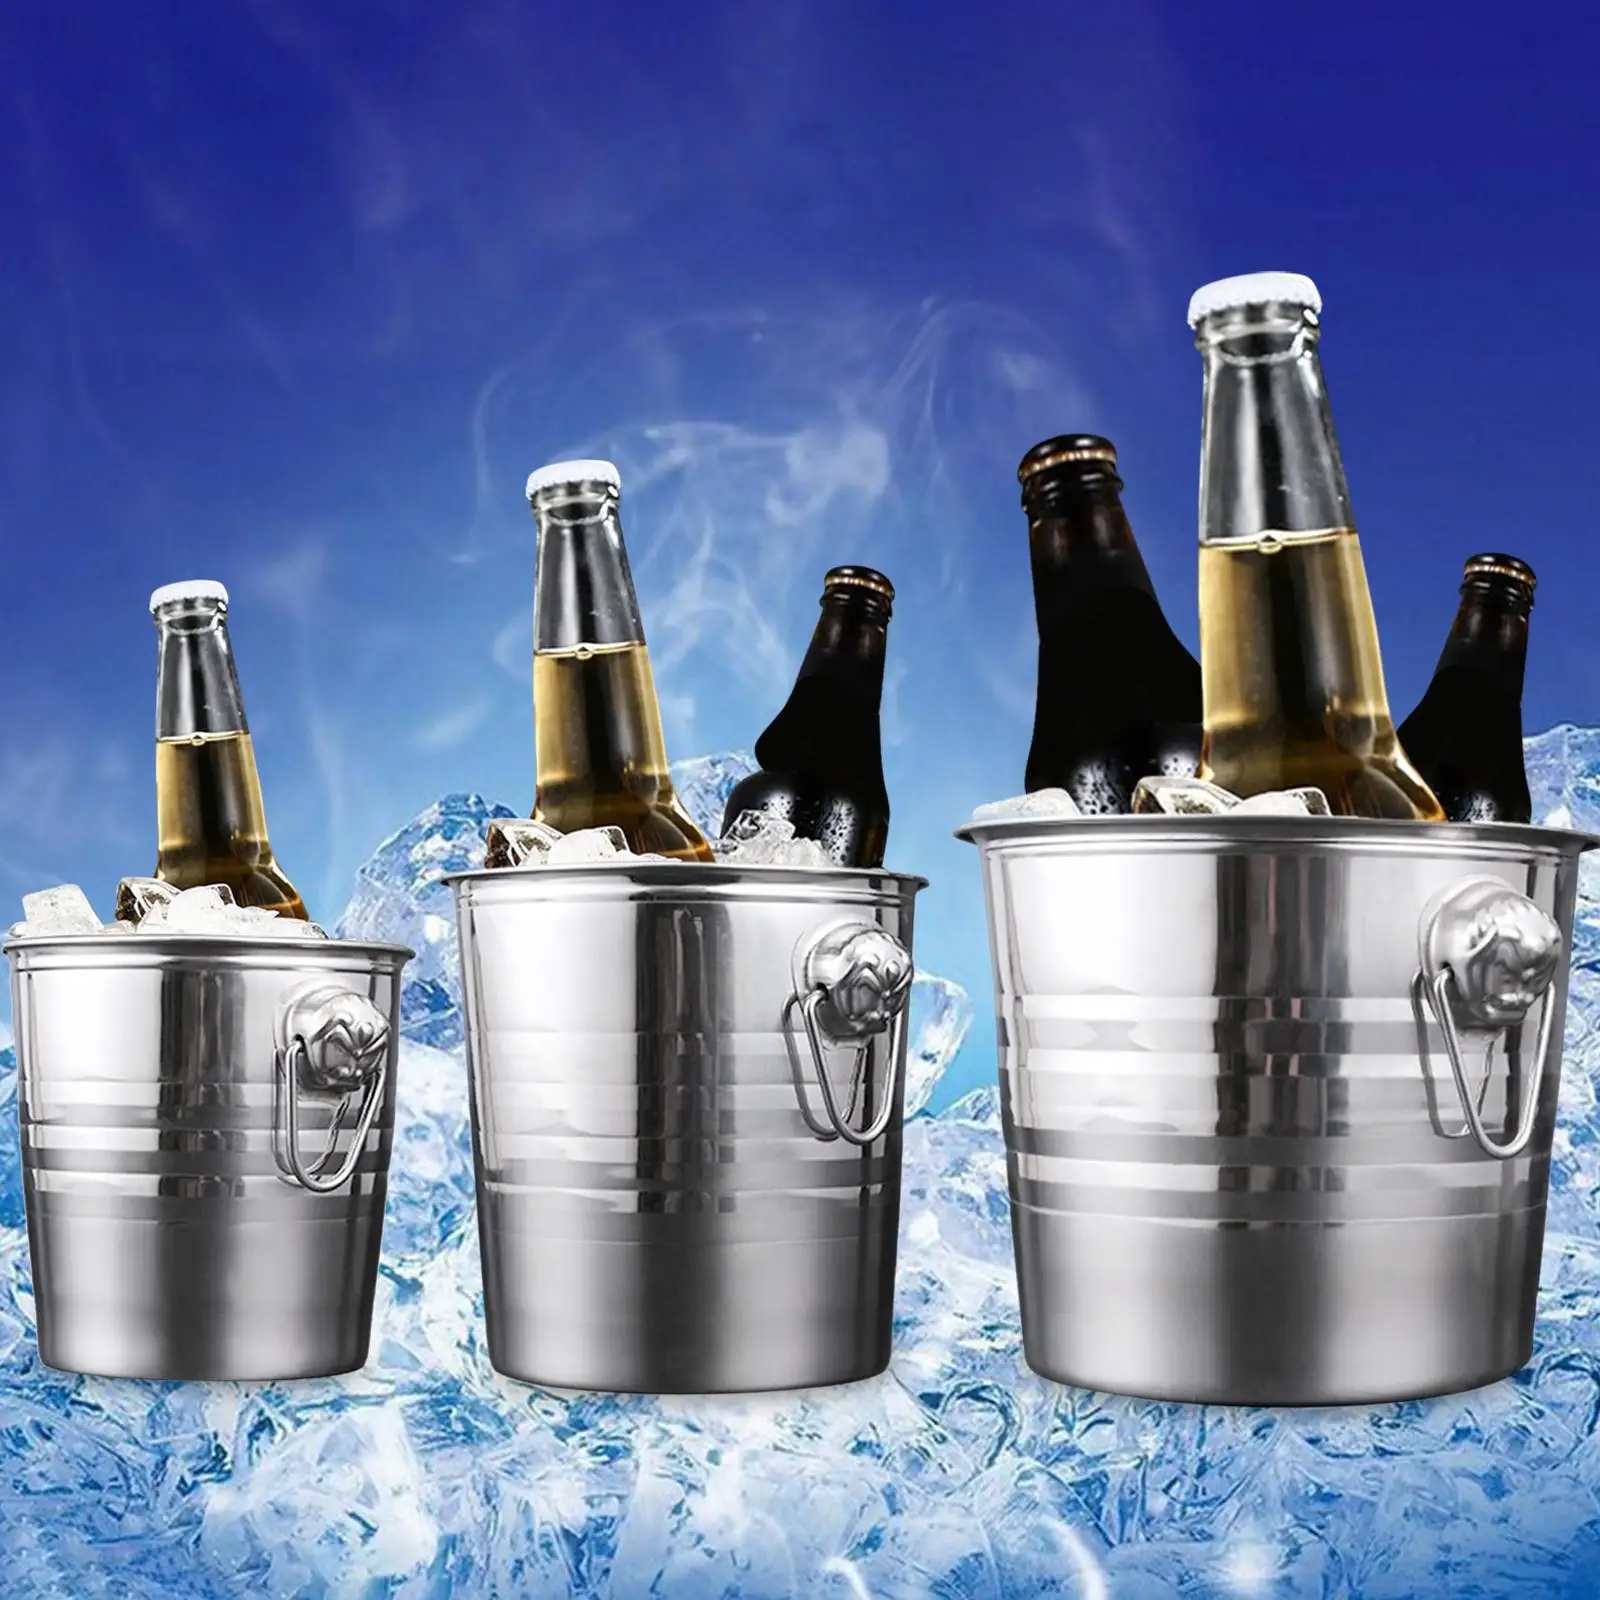 Ice Bucket with Handles Home Bar Accessories Stainless Steel Double Wall Insulated Beverage Tub for Home Bar Bottle Champagne